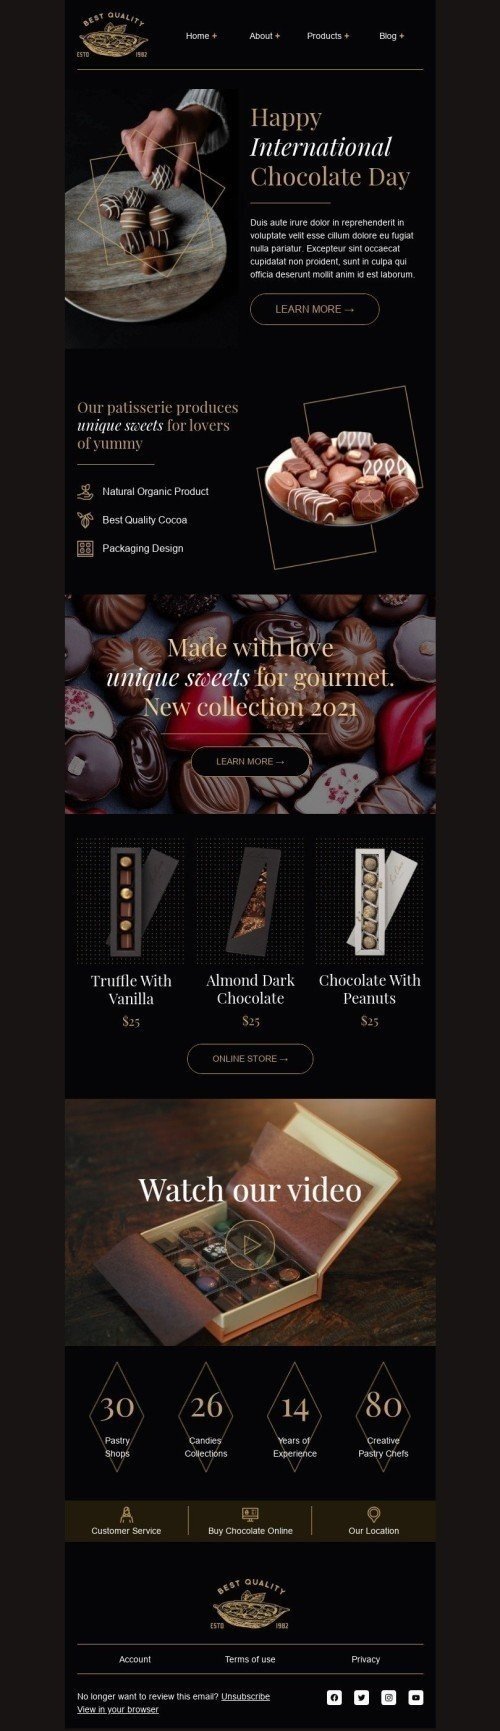 International Chocolate Day Email Template "Made with love" for Food industry mobile view